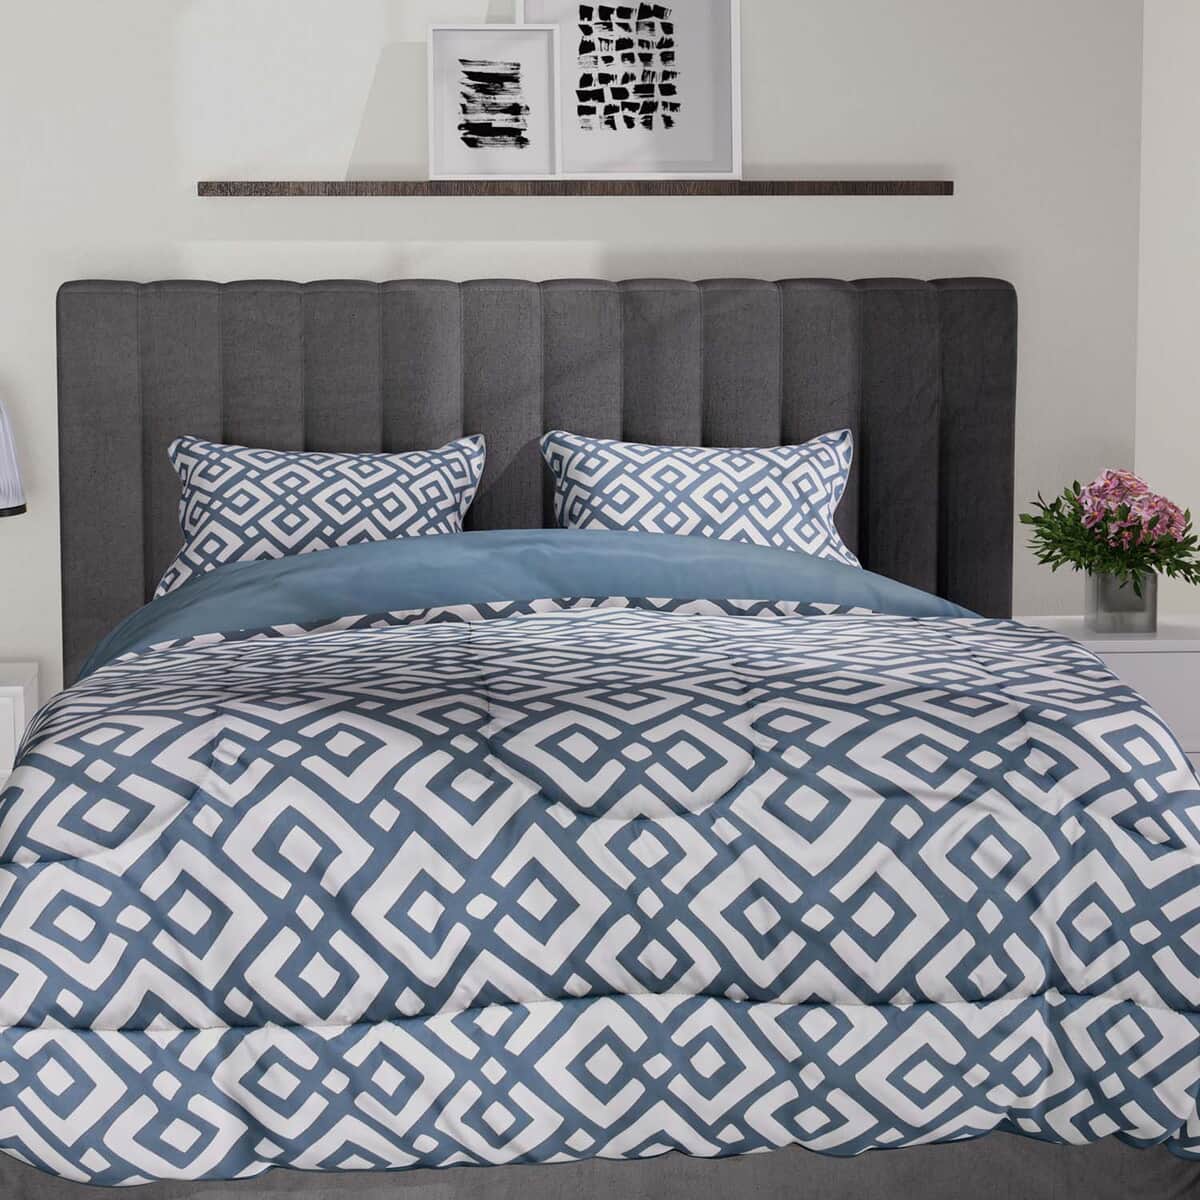 Blue Solid and Geometrical Print Microfiber 3pcs Comforter Set - Queen image number 6